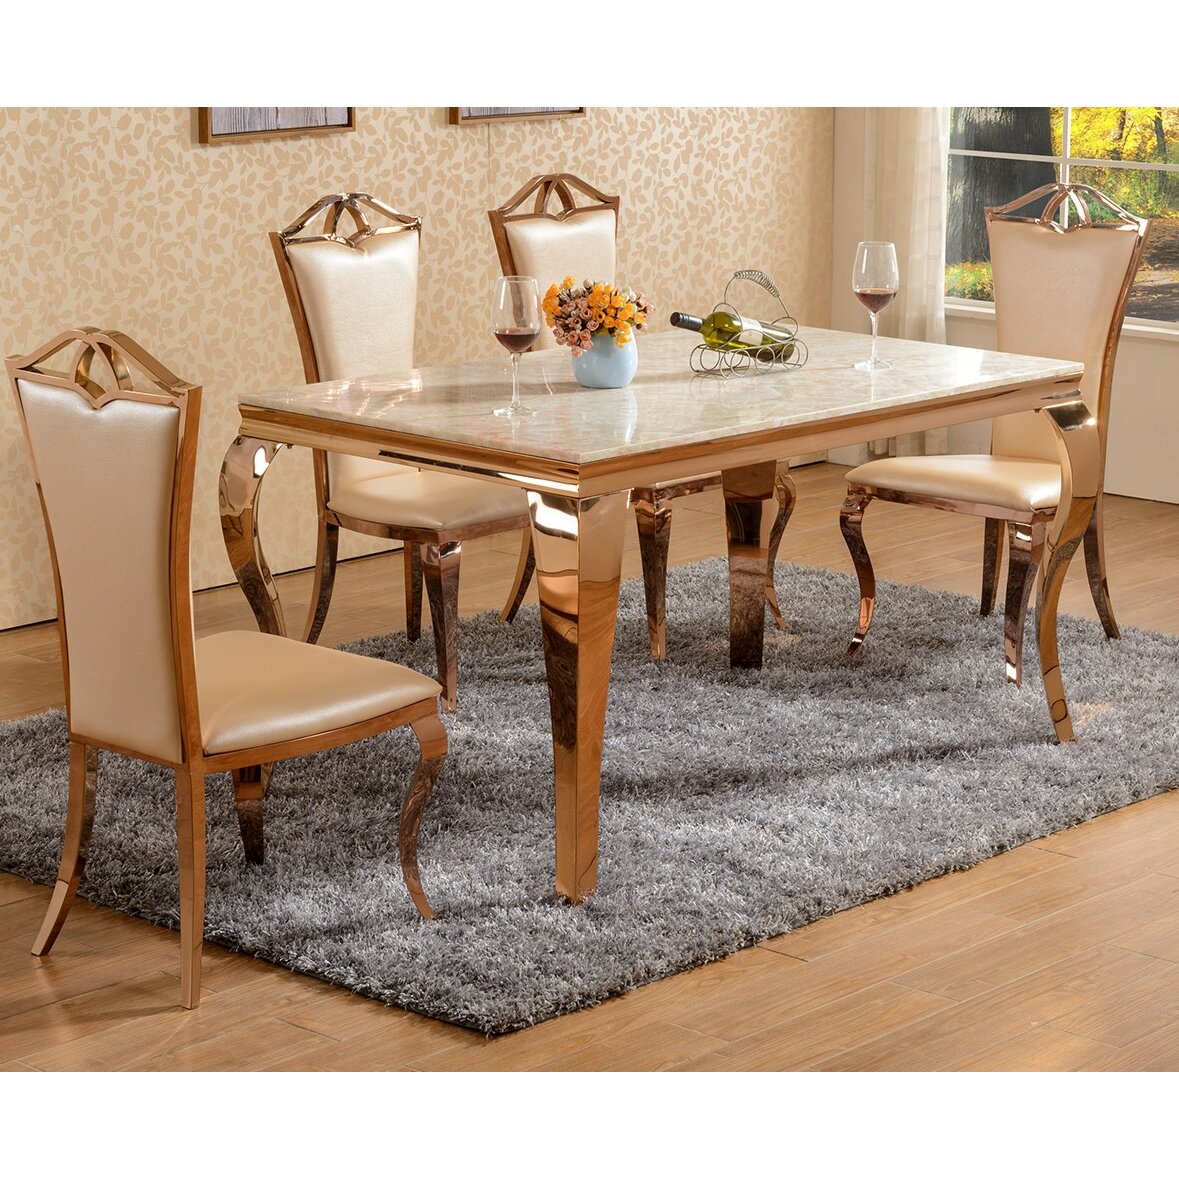 Derrys Julia Dining Table And 6 Chairs 